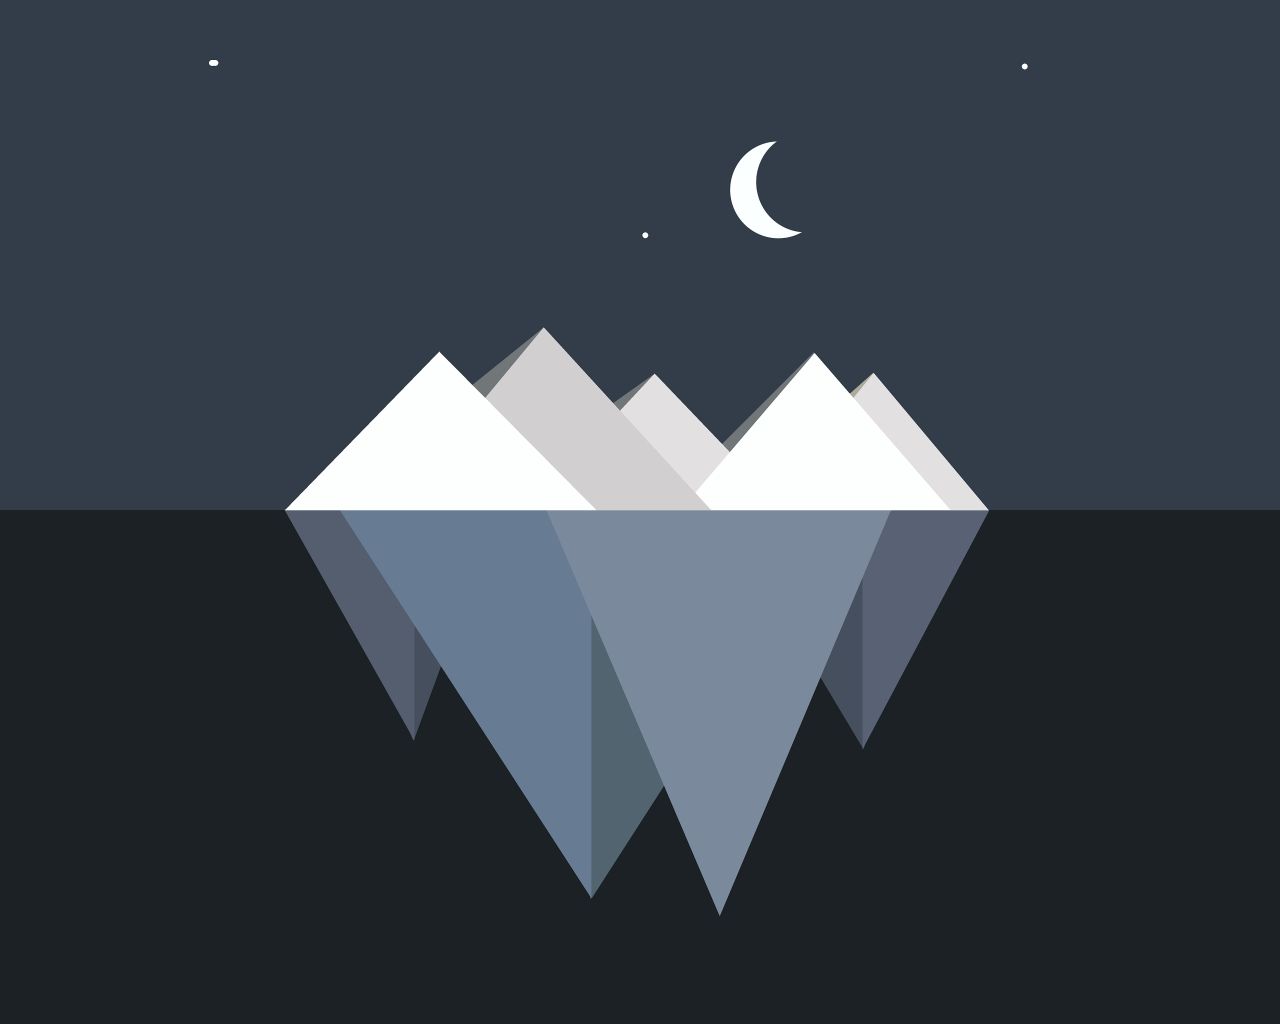 A geometric illustration of a mountain range at night with a crescent moon in the sky. - 1280x1024